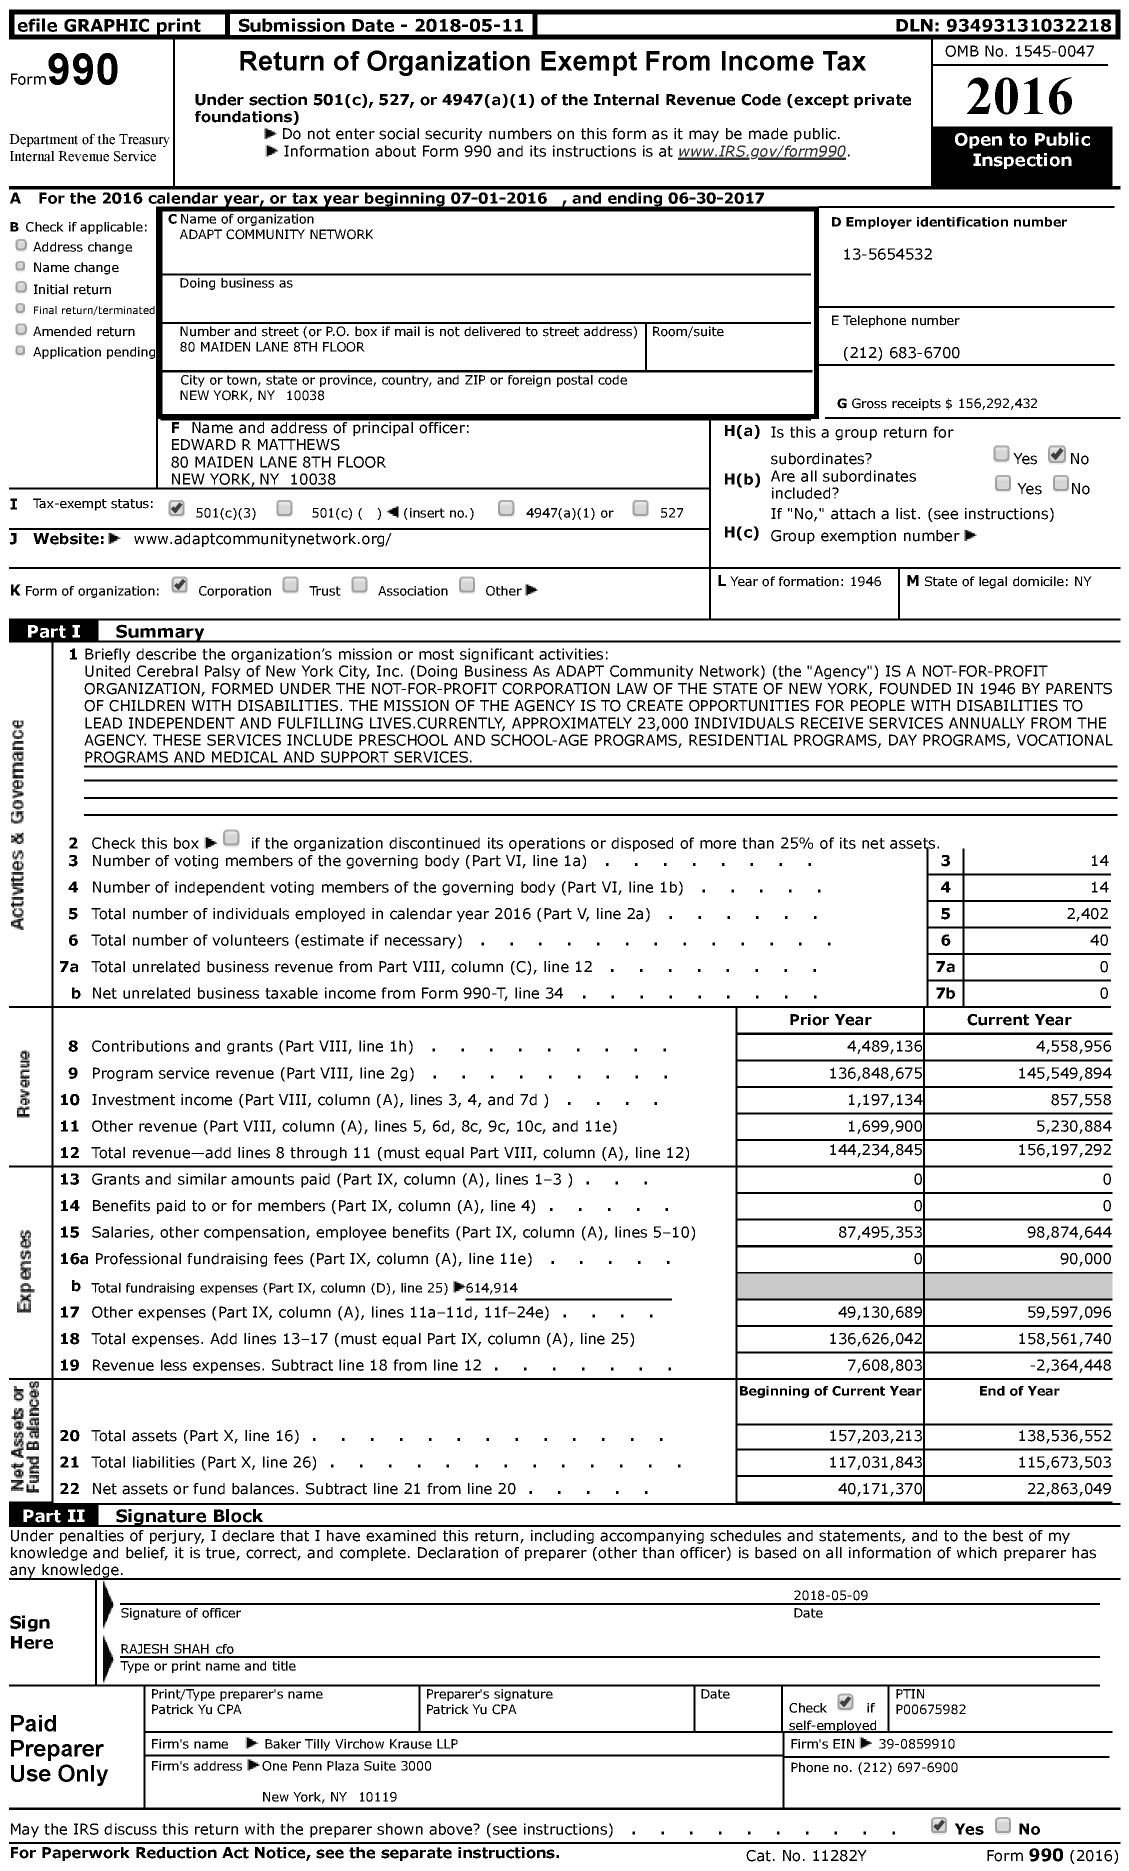 Image of first page of 2016 Form 990 for Adapt Community Network